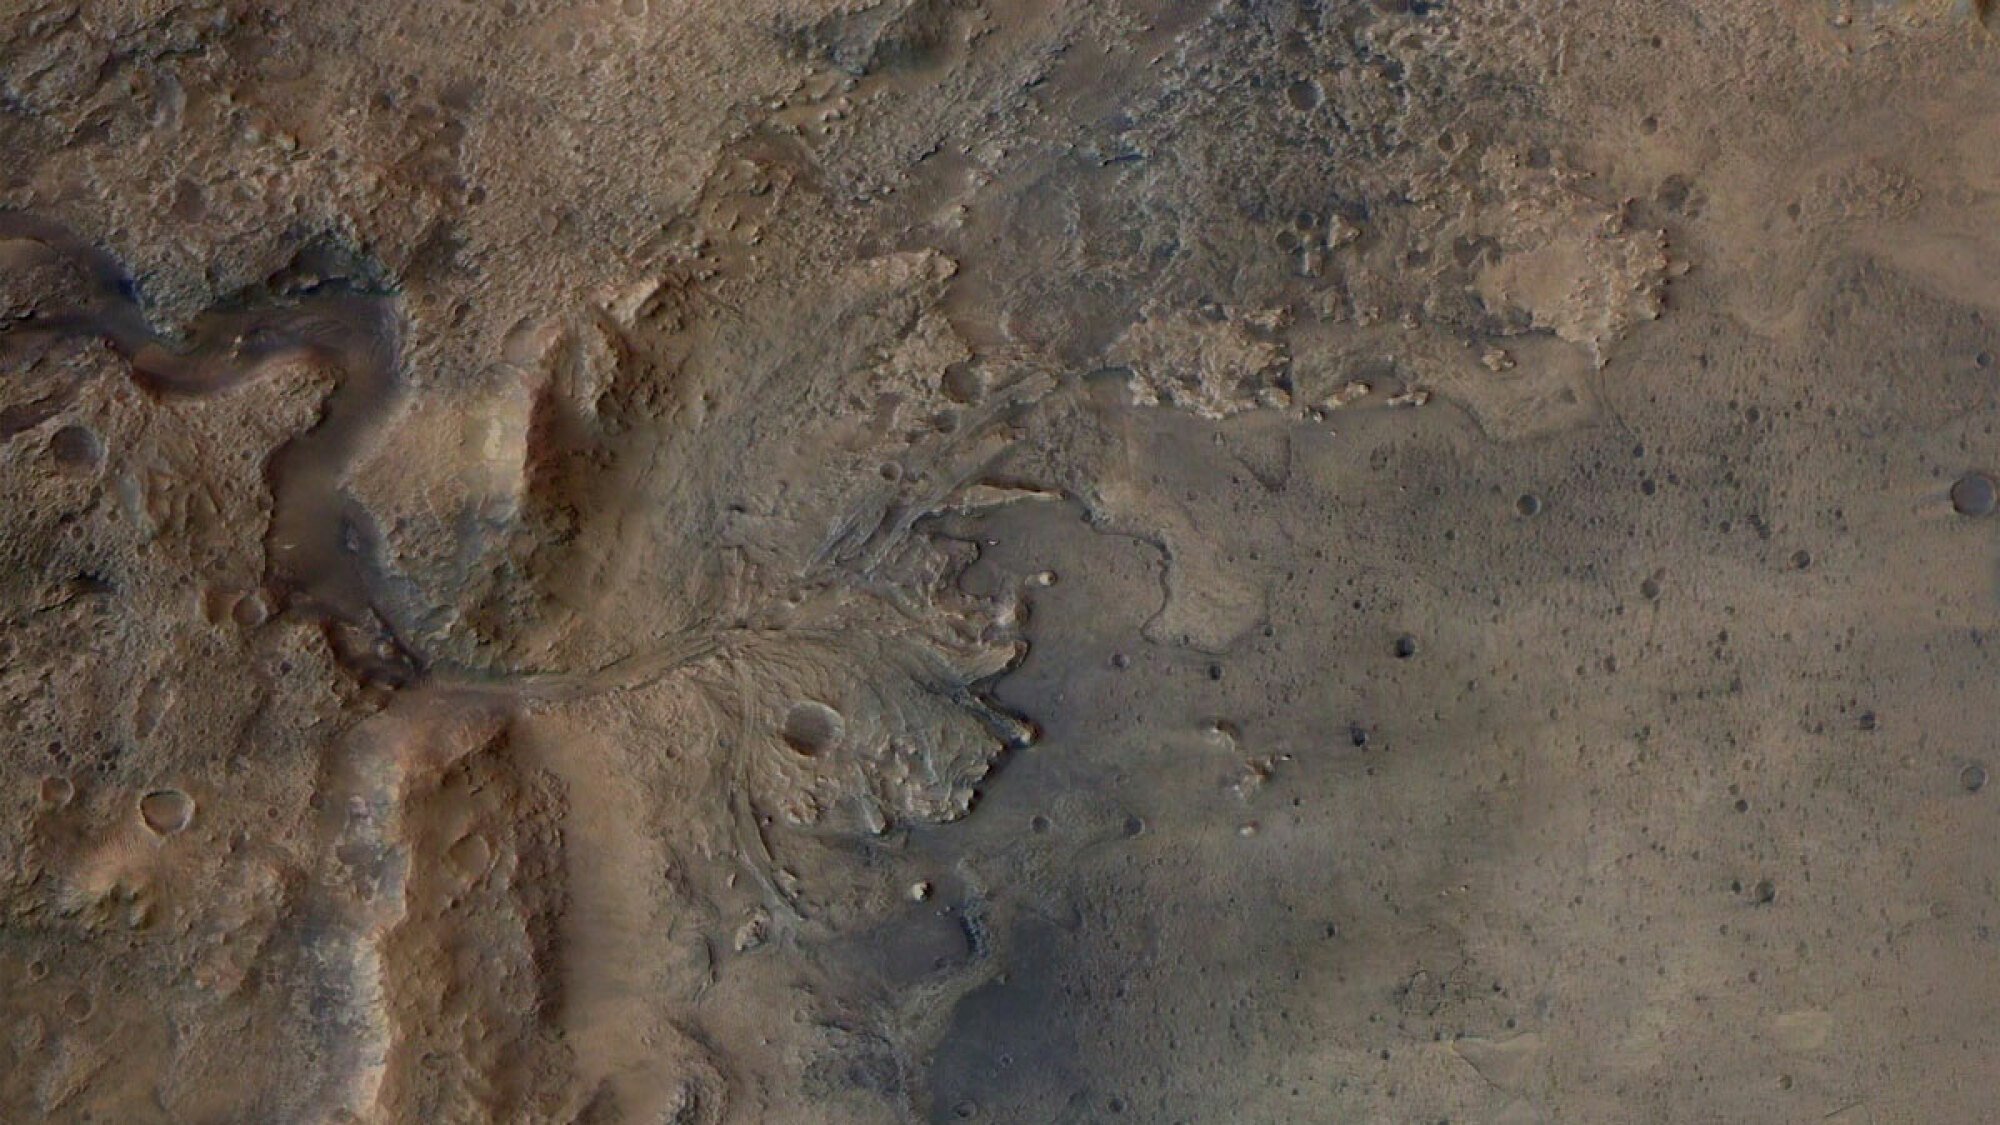 The Jezero Crater on Mars, a dried-up river delta now explored by NASA's Perseverance rover.